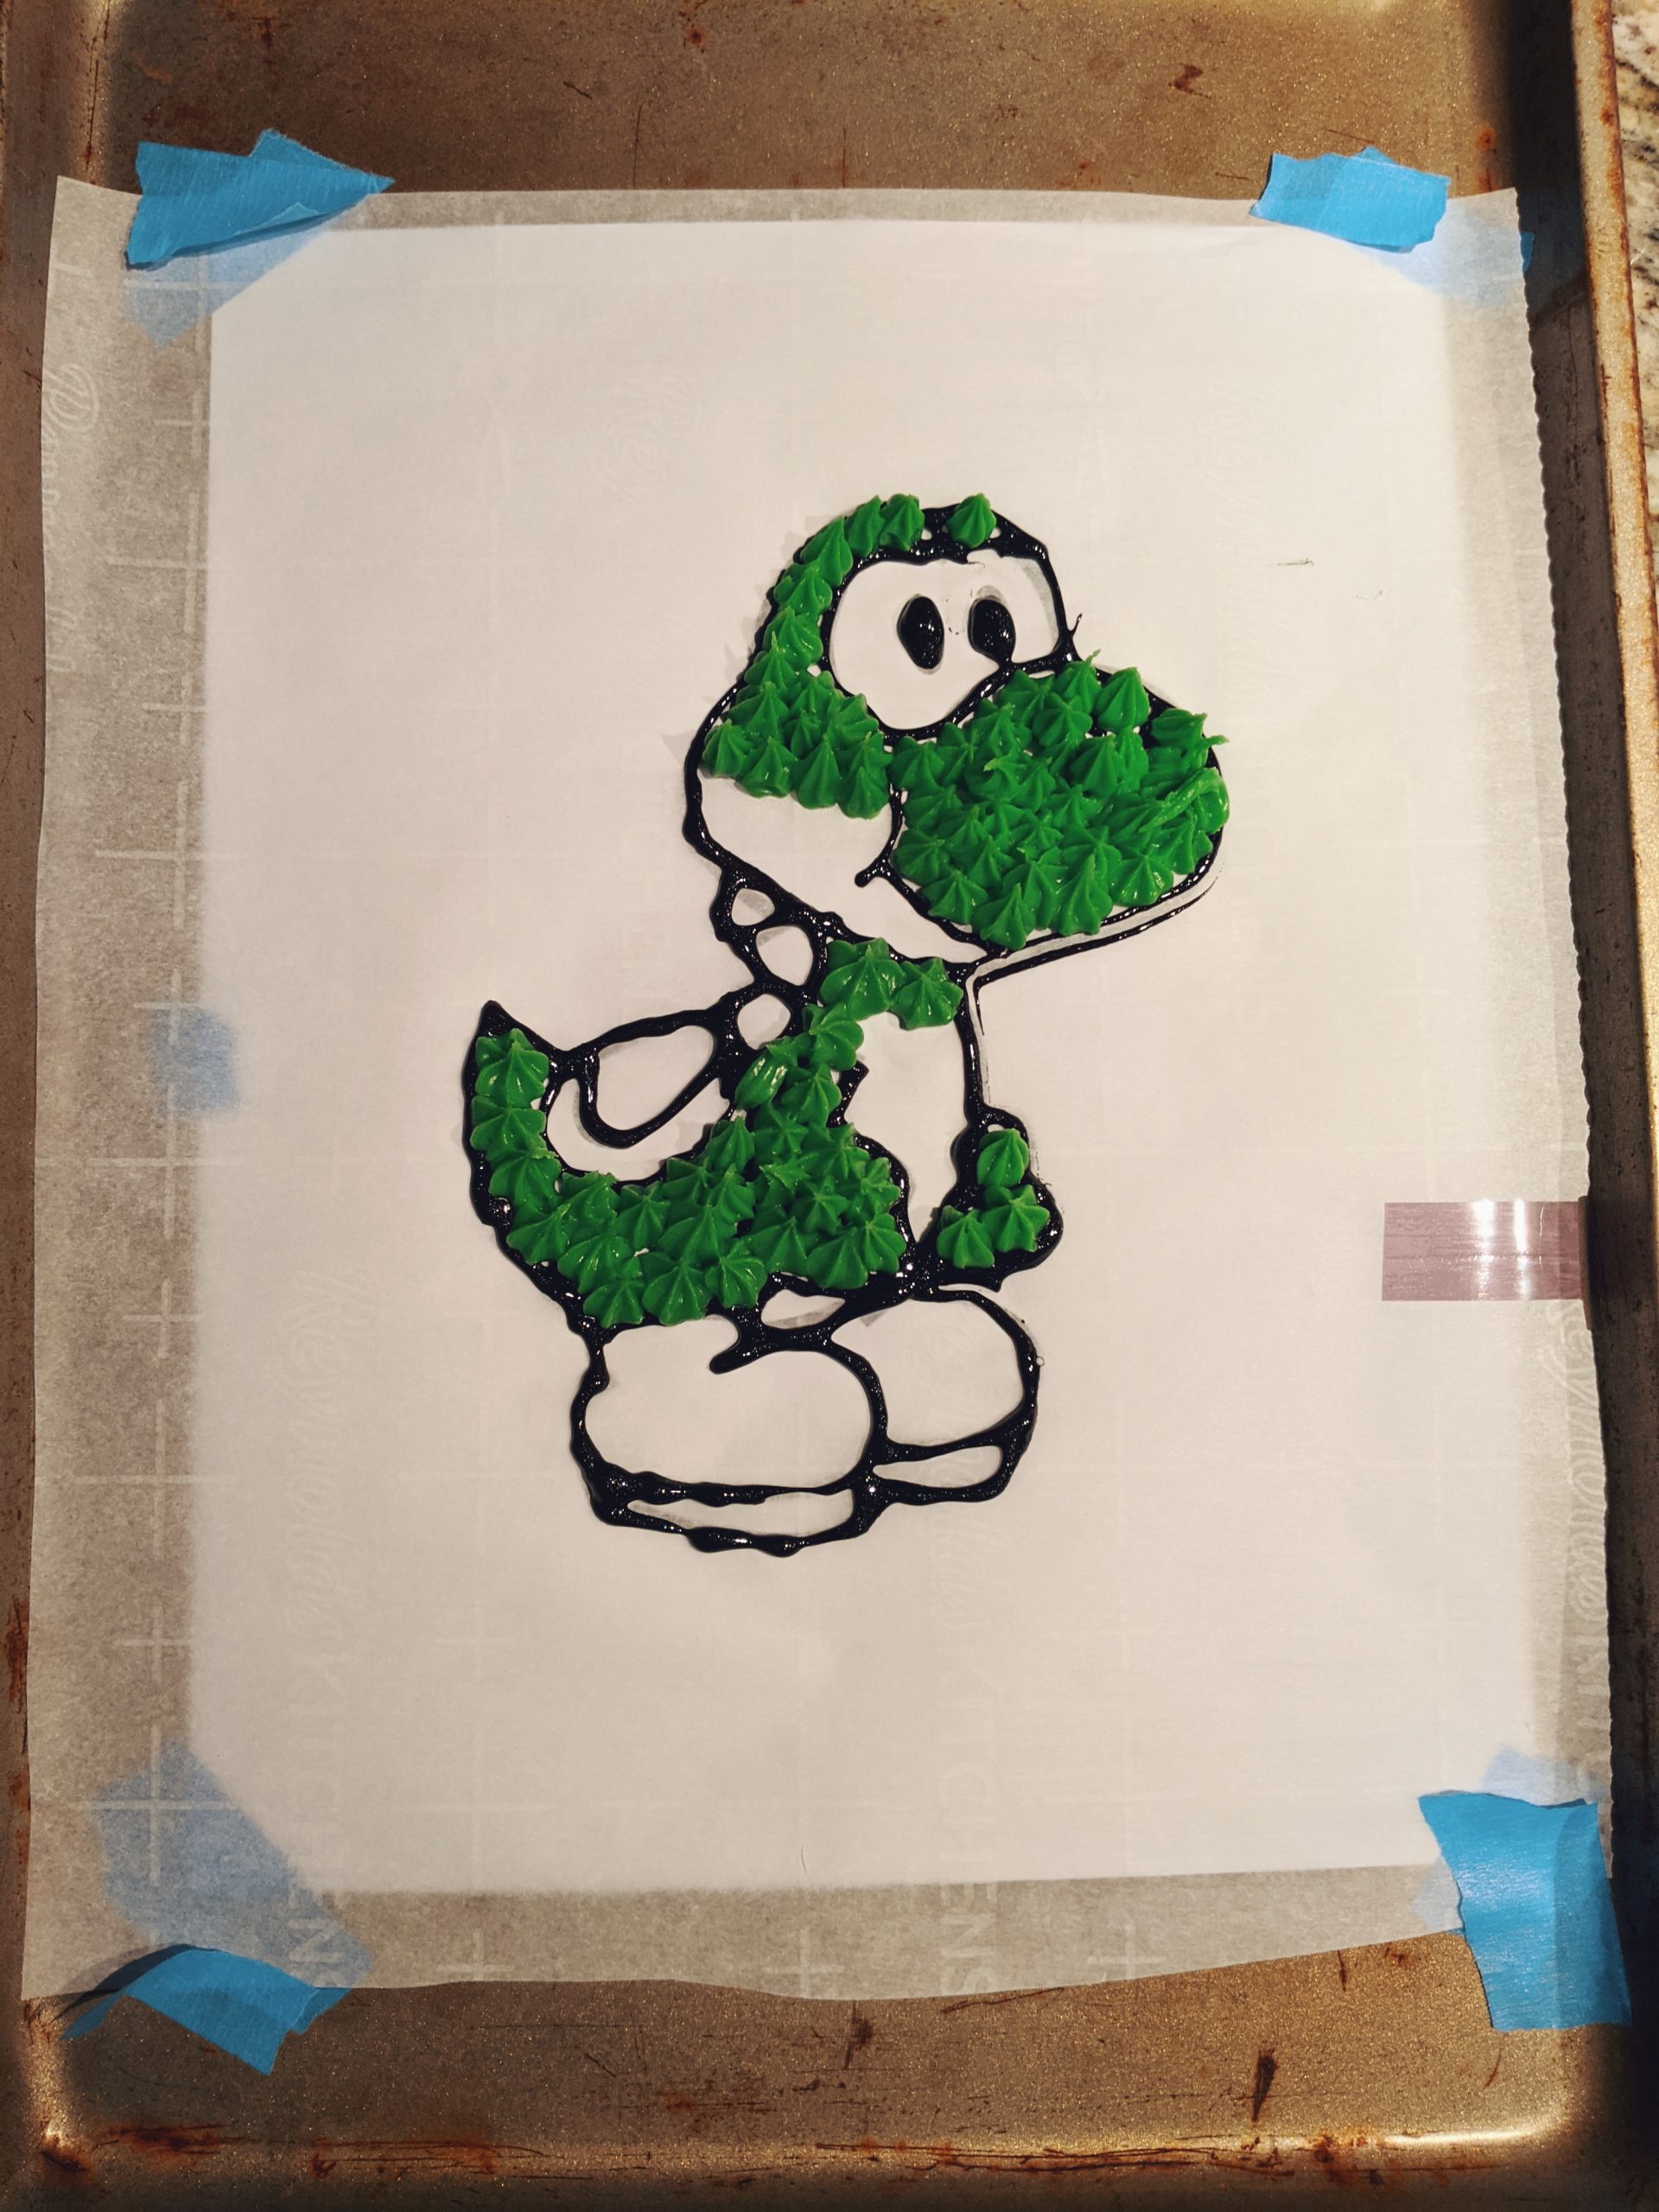 How to Make a Character Cake - DIY Character Cake: Easy DIY Instructions to put ANY character on a cake! Here's how to do a frozen buttercream transfer to make a character cake. #cakedecorating #yoshi #cakes 